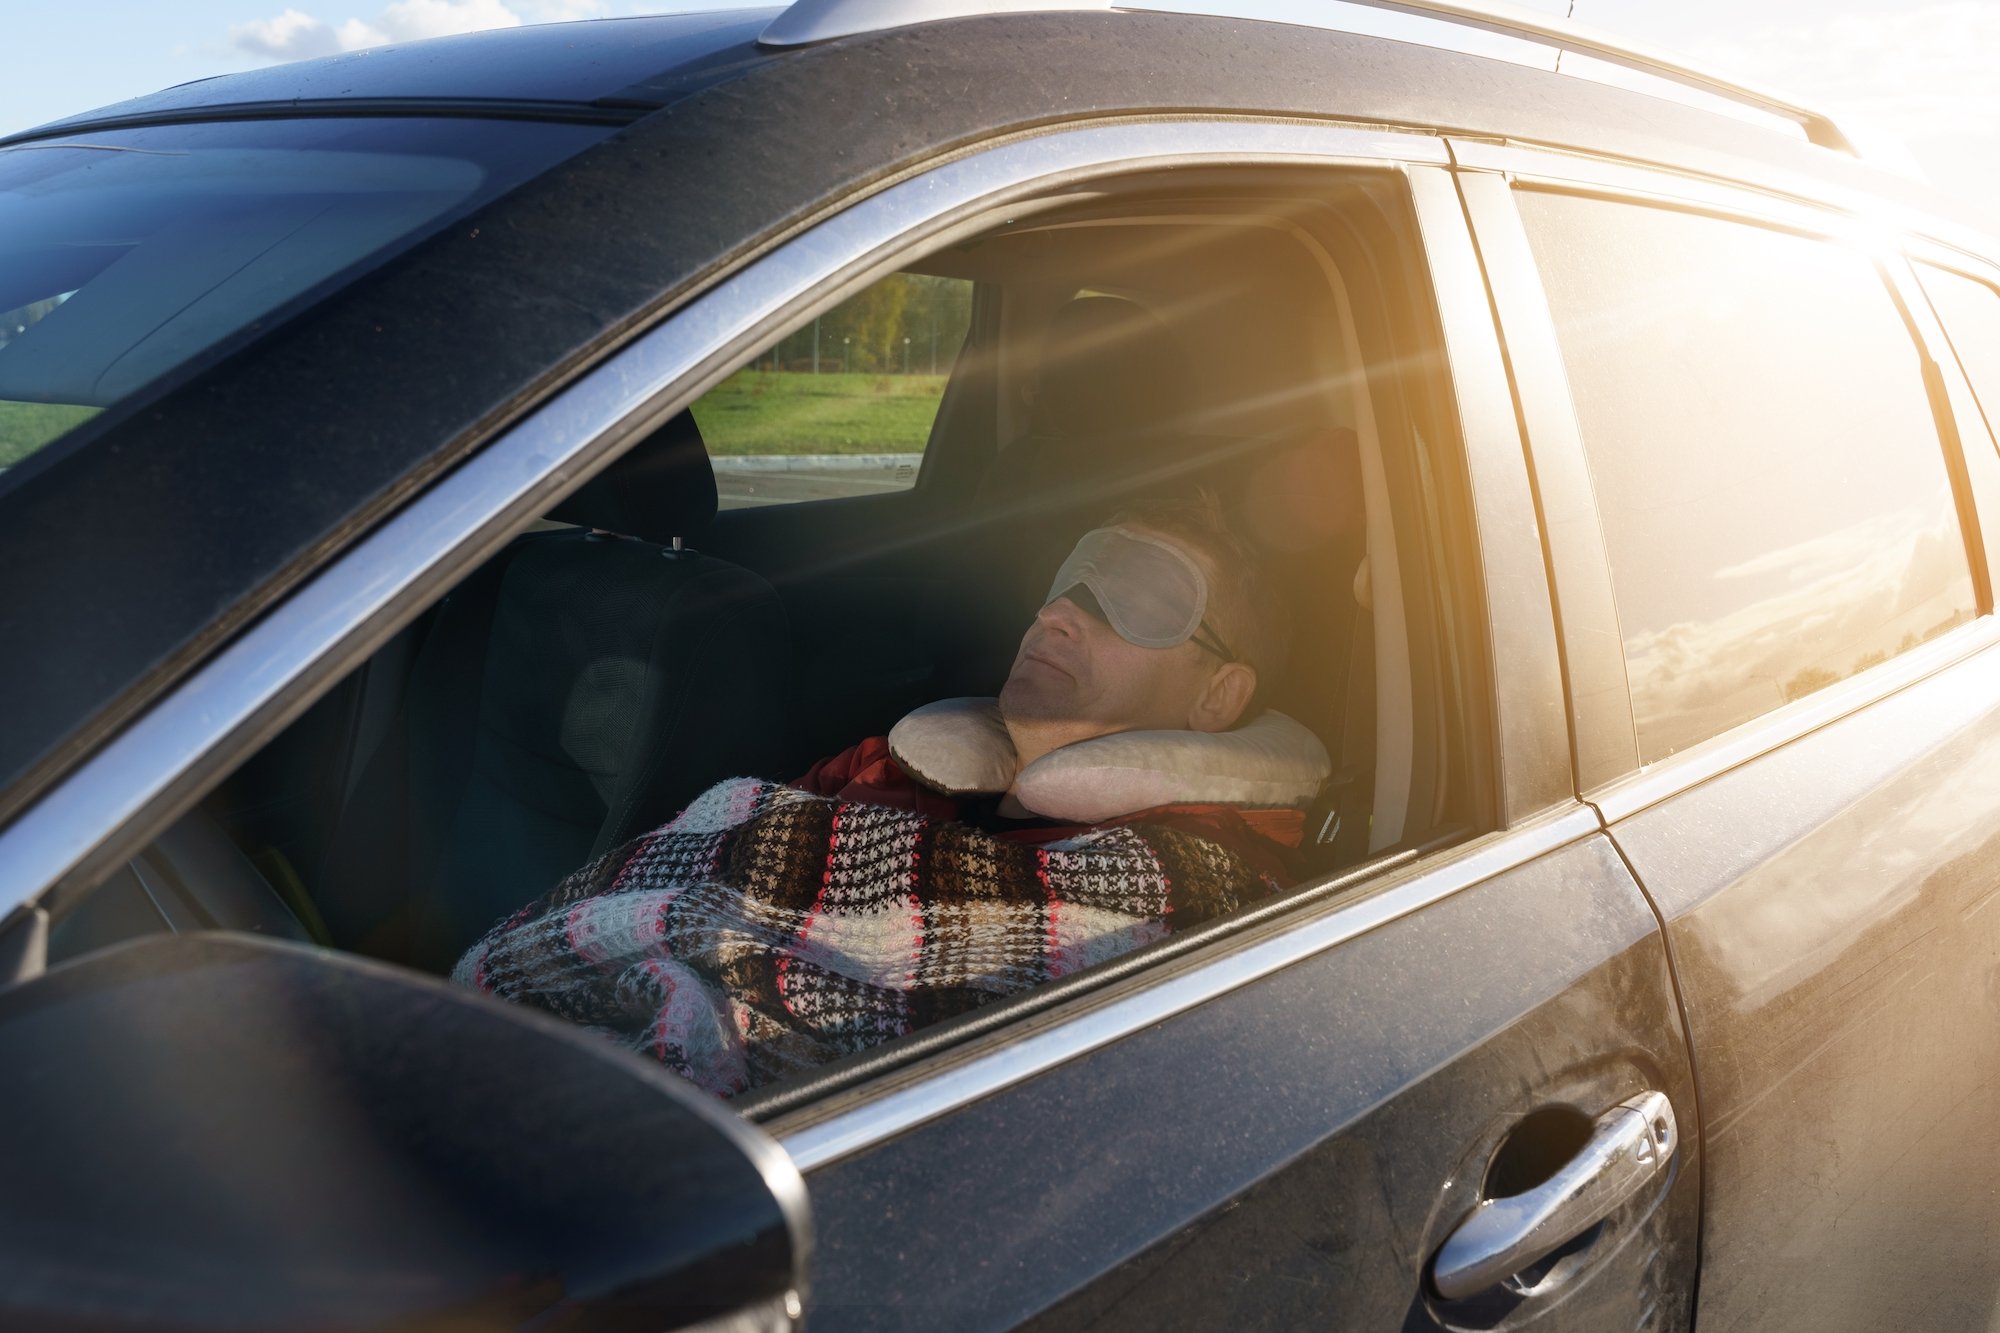 Tips for Safely Sleeping in a Car